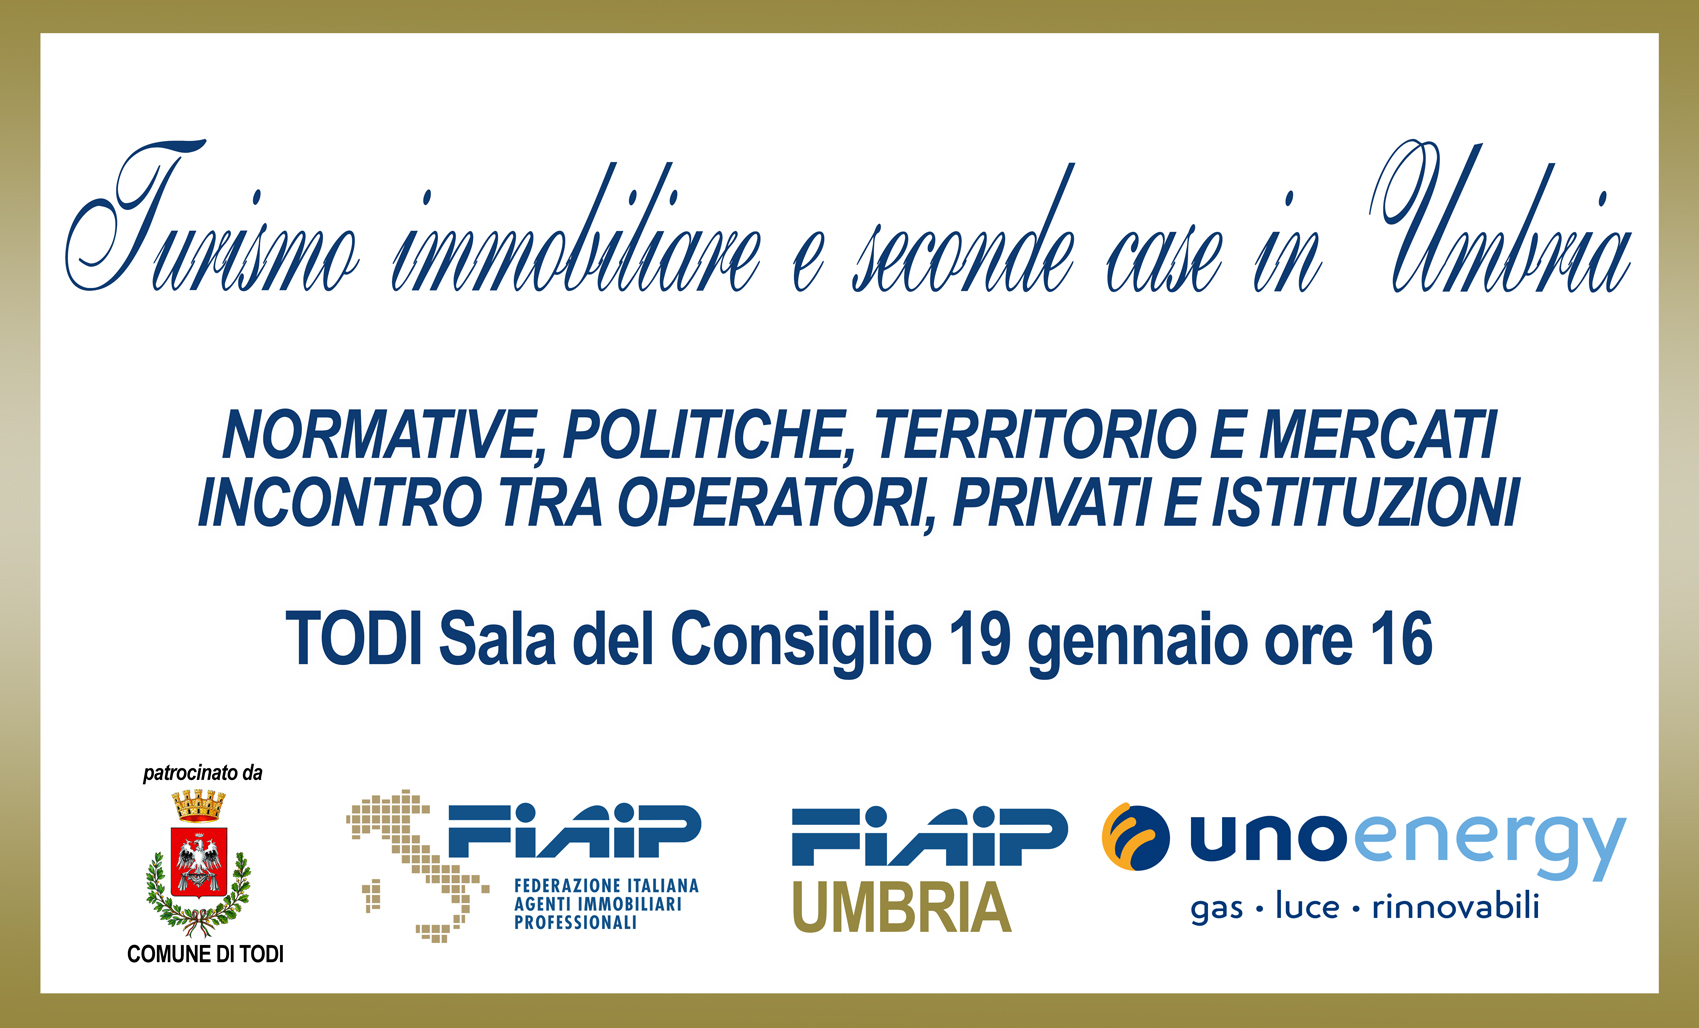 Real estate tourism and second homes in Umbria, meeting between operators, private individuals and institutions